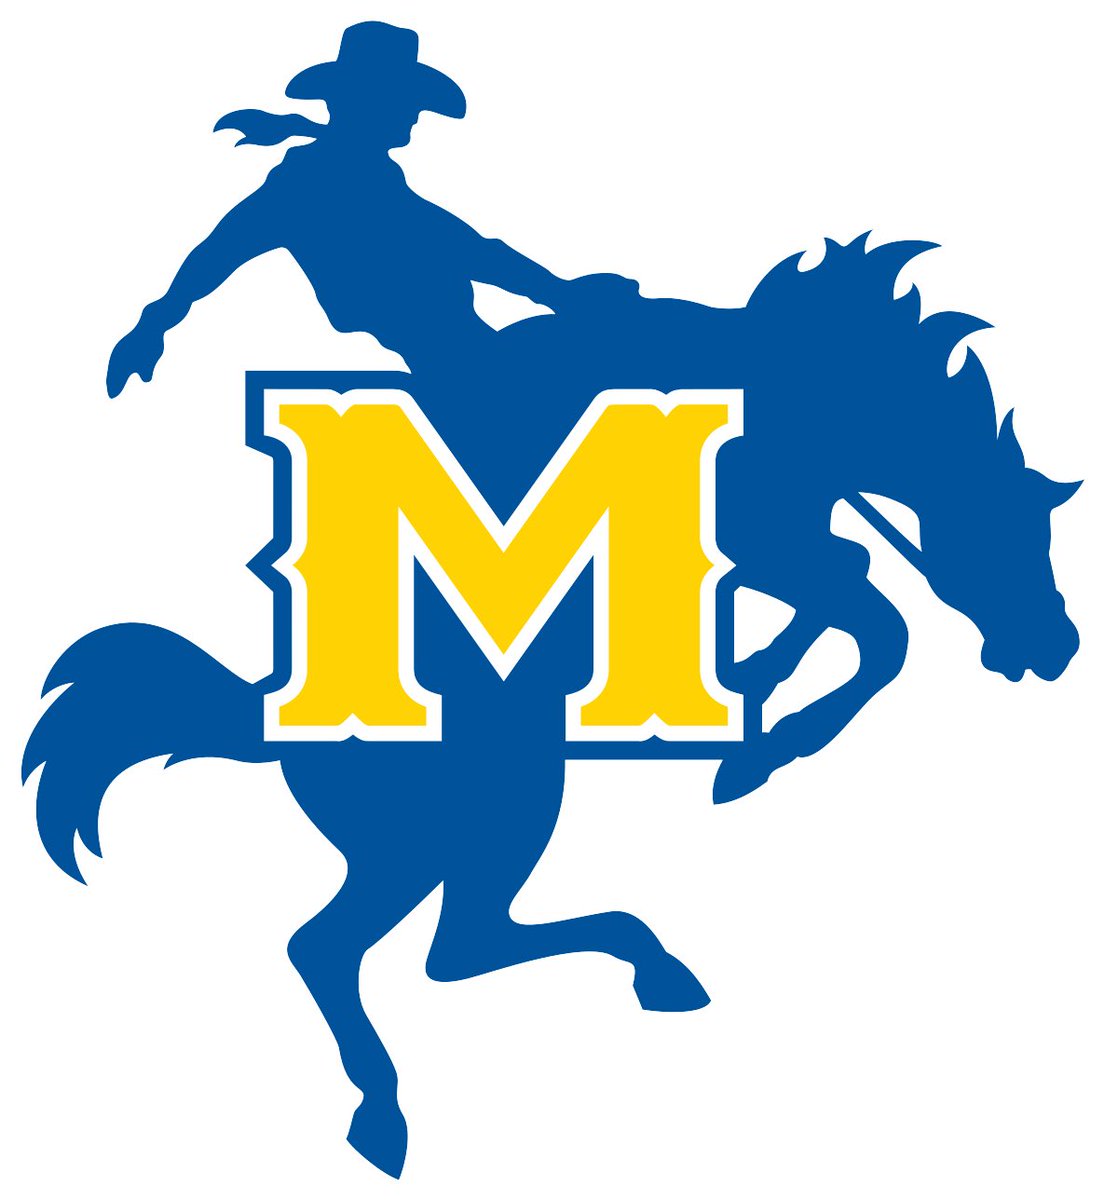 Blessed to be able to make this post again. I have had a second offer from McNeese State University Baseball. I am beyond thankful for all of the coaches who have taken to time to reach out to me, and who believe in me as an athlete fit for their program. All Glory to God.